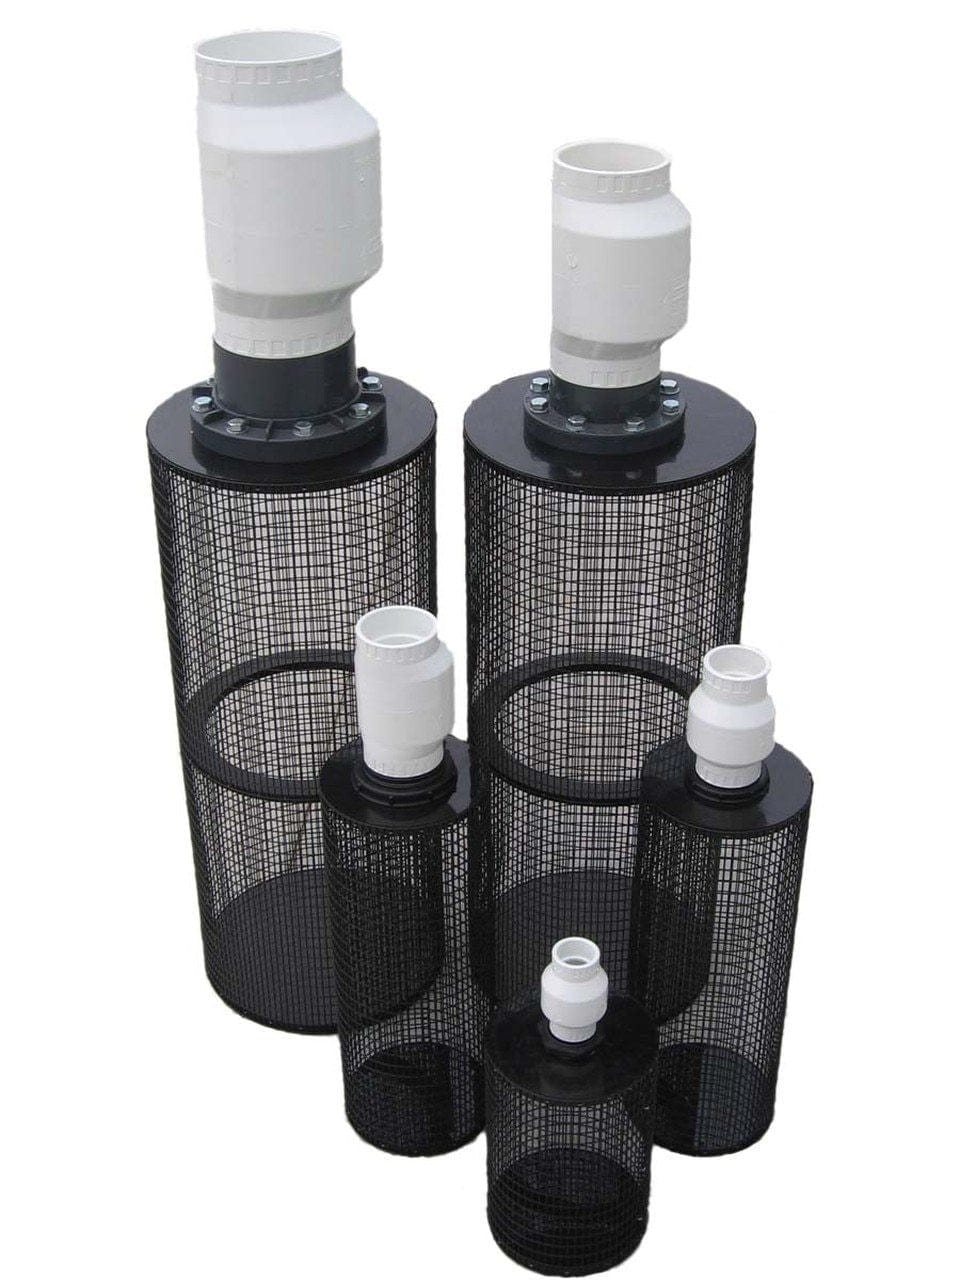 EasyPro Pump Accessories PIF2-90 gpm 2" High Volume Pond and Lake Pump Intake Screen Water Pump Pond Intake Screen | Lake Water Filter Screen